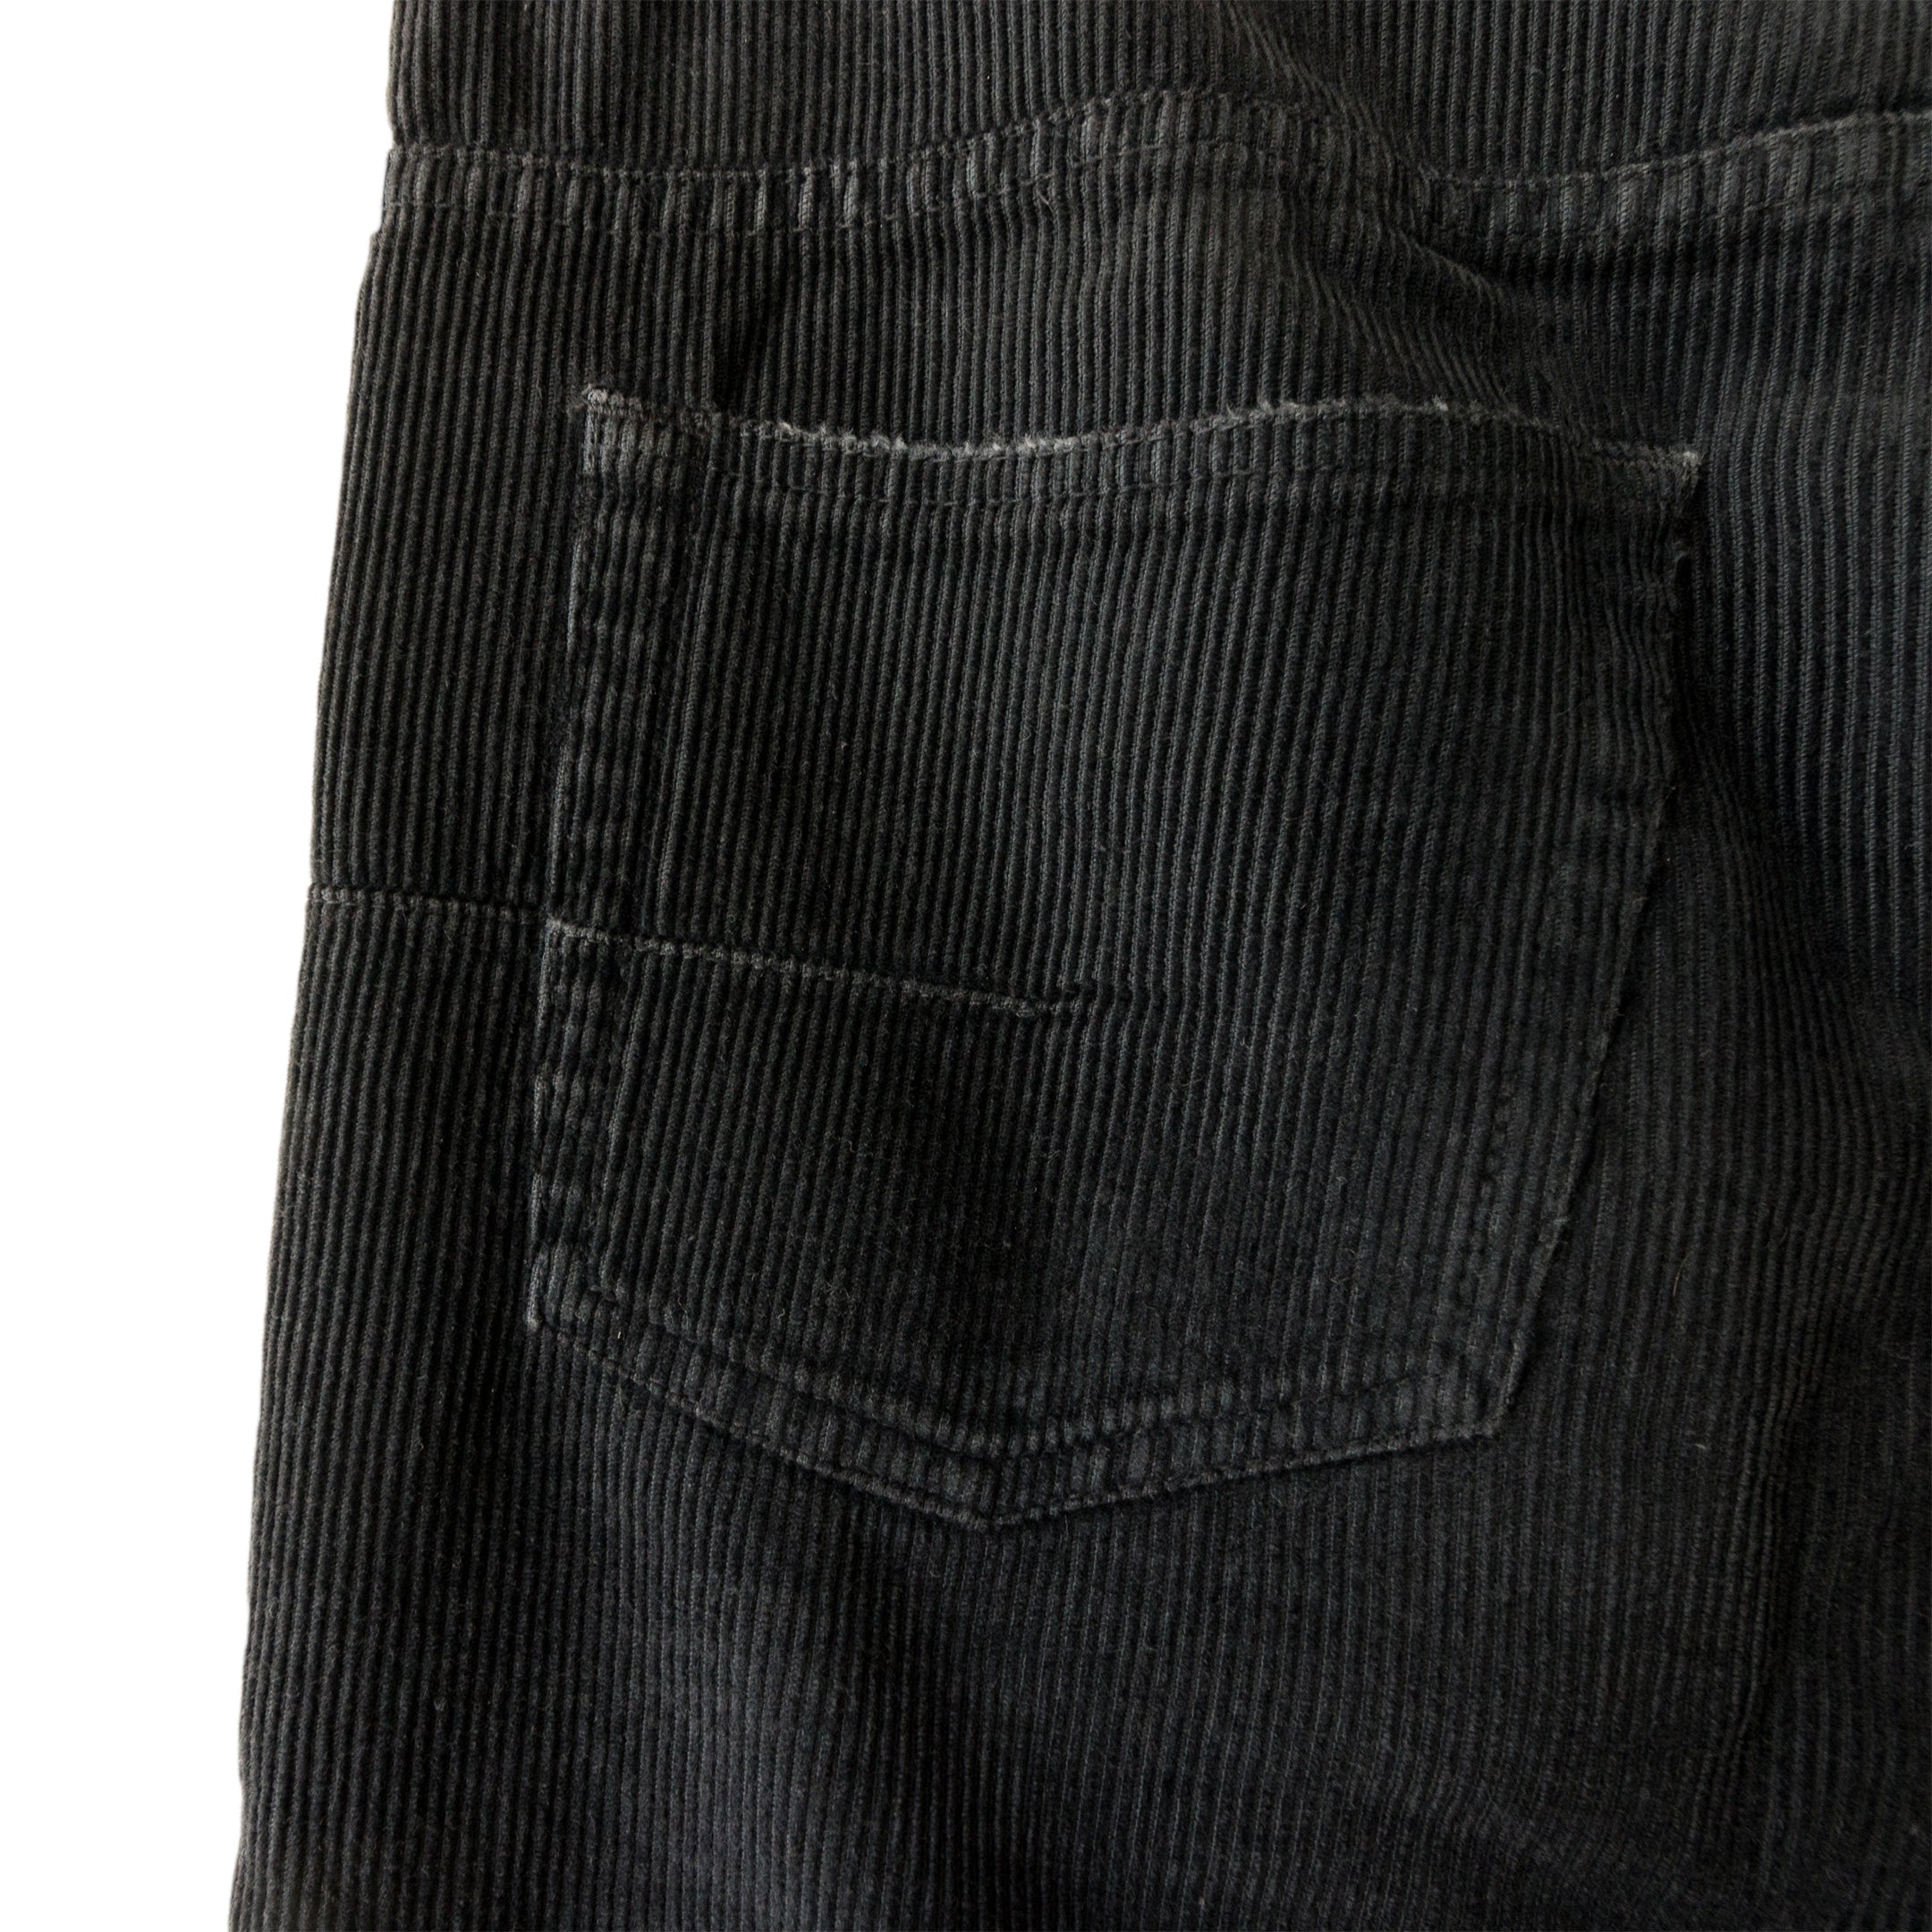 Dior Homme Black Corduroy Jeans - AW05 